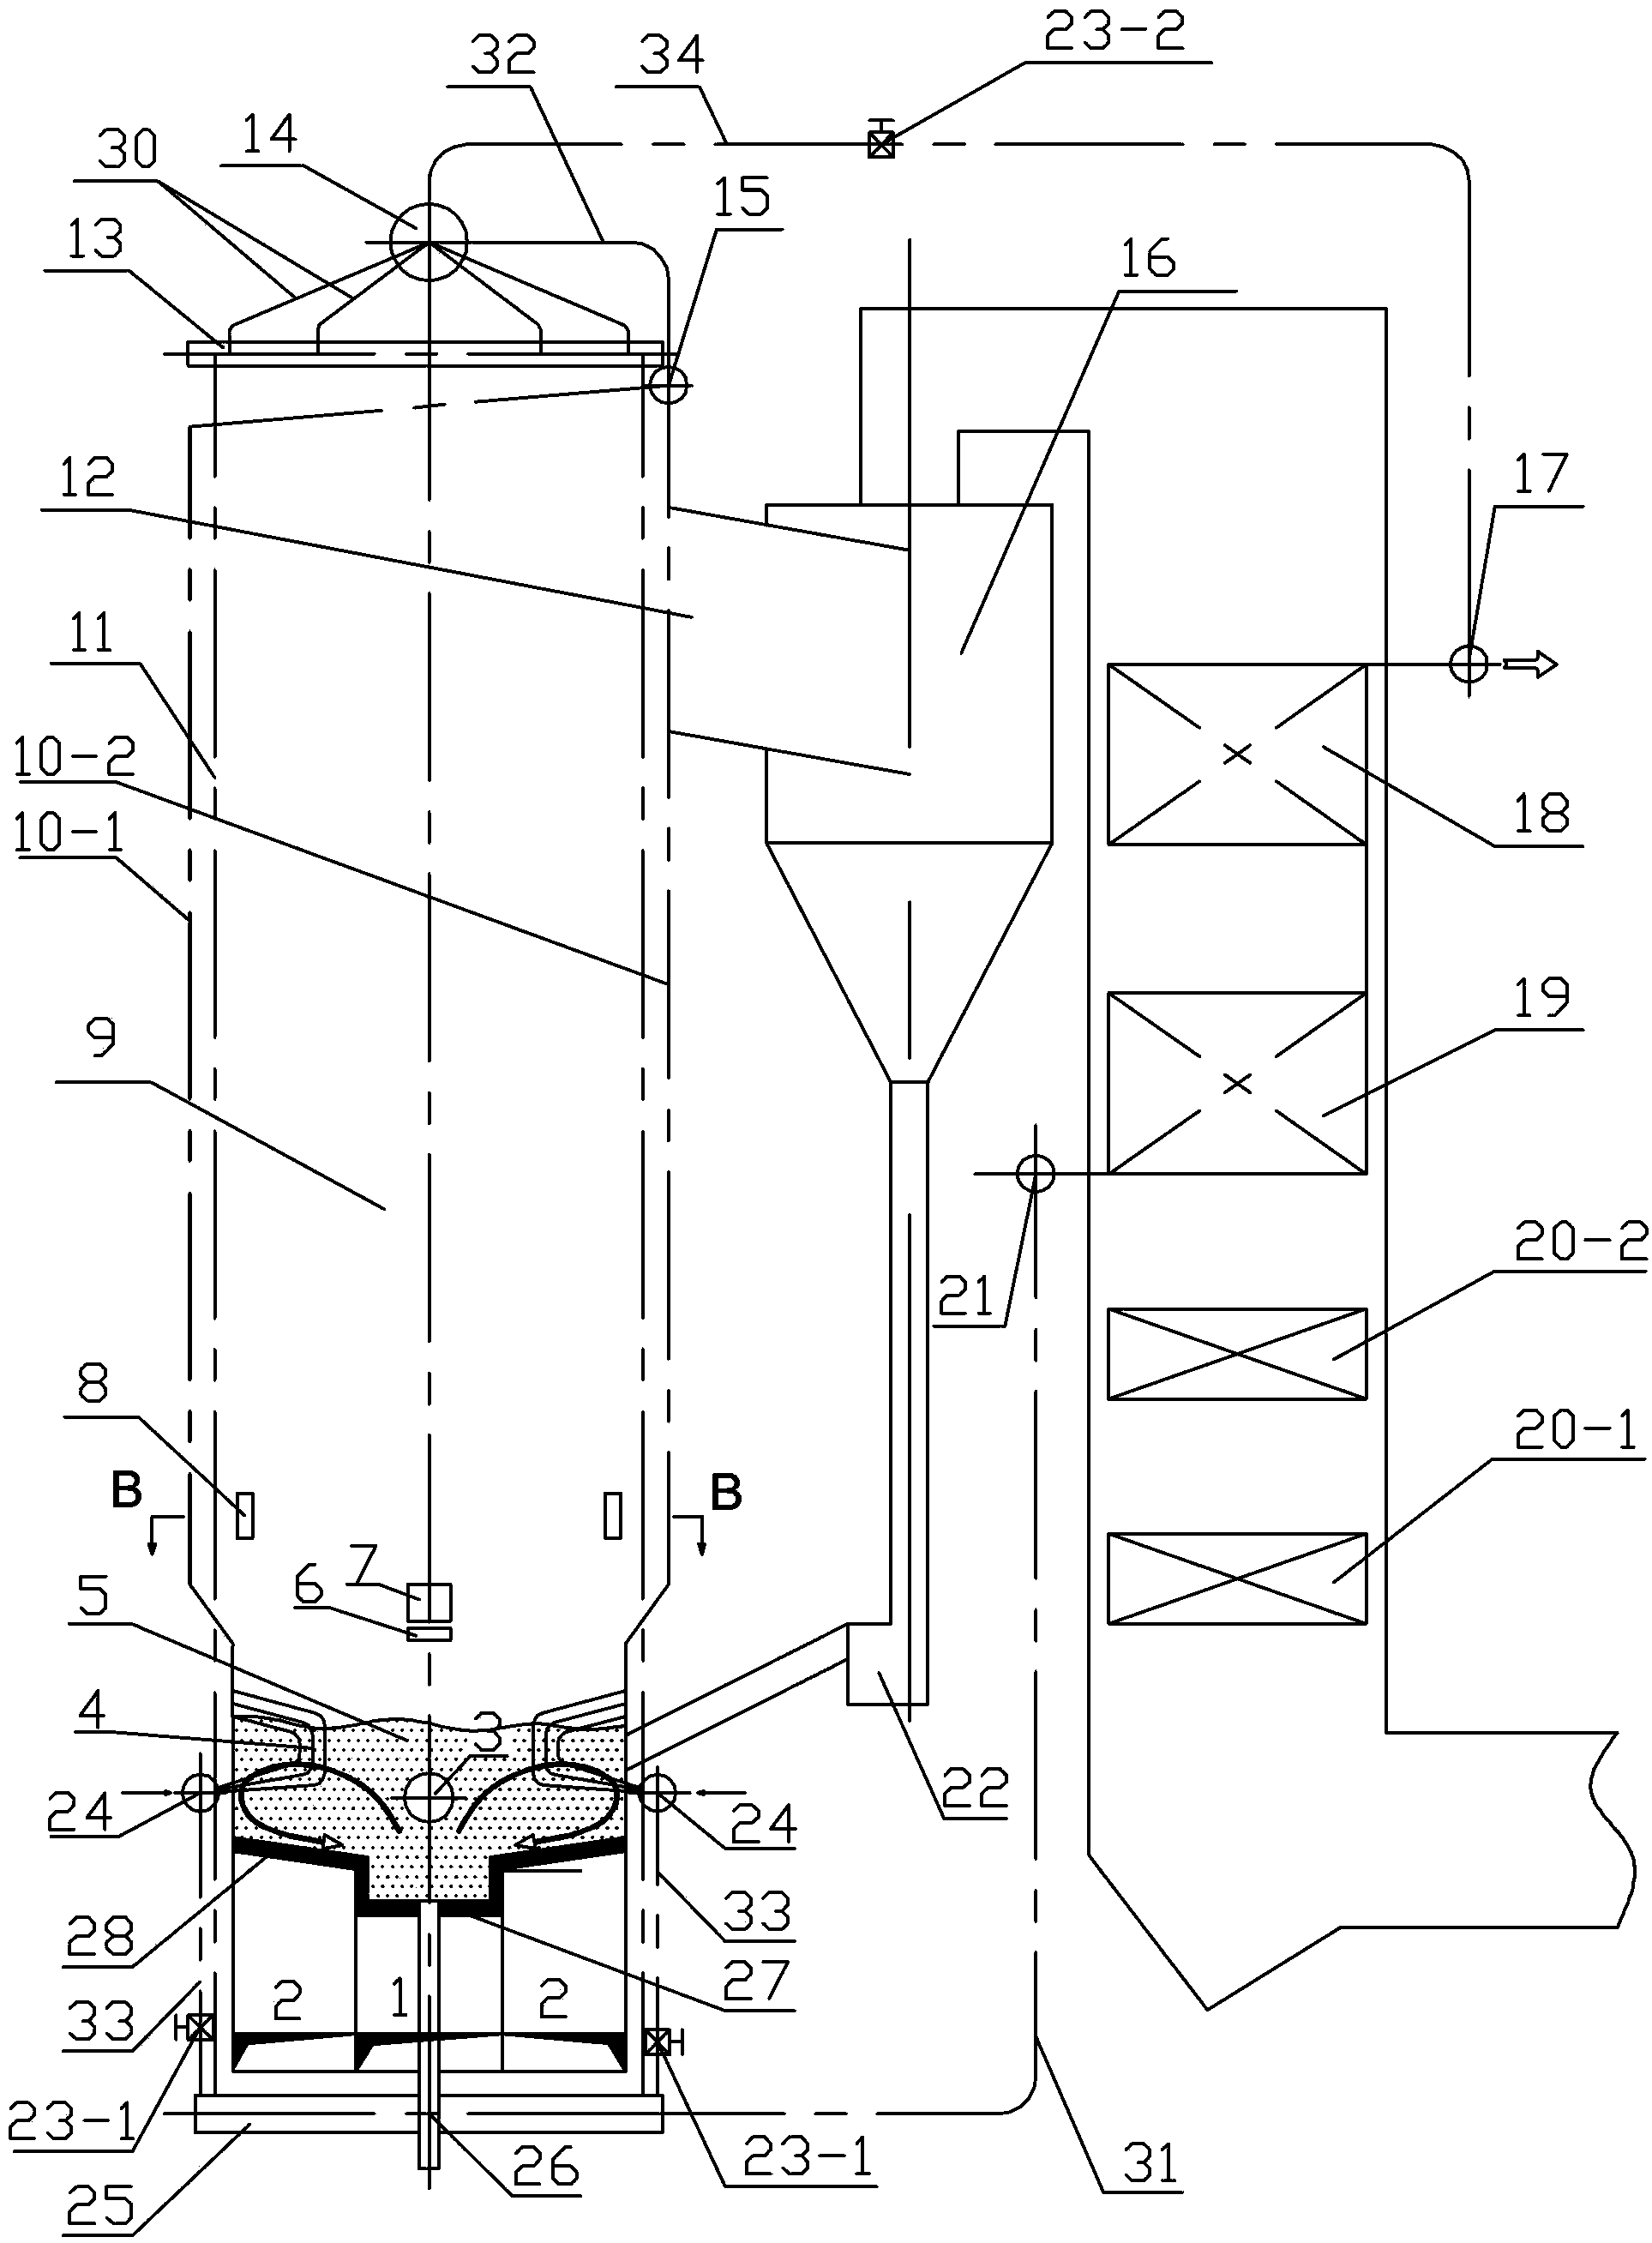 Low-range circulating fluidized bed water boiler for combusting inferior fuel and combustion method thereof